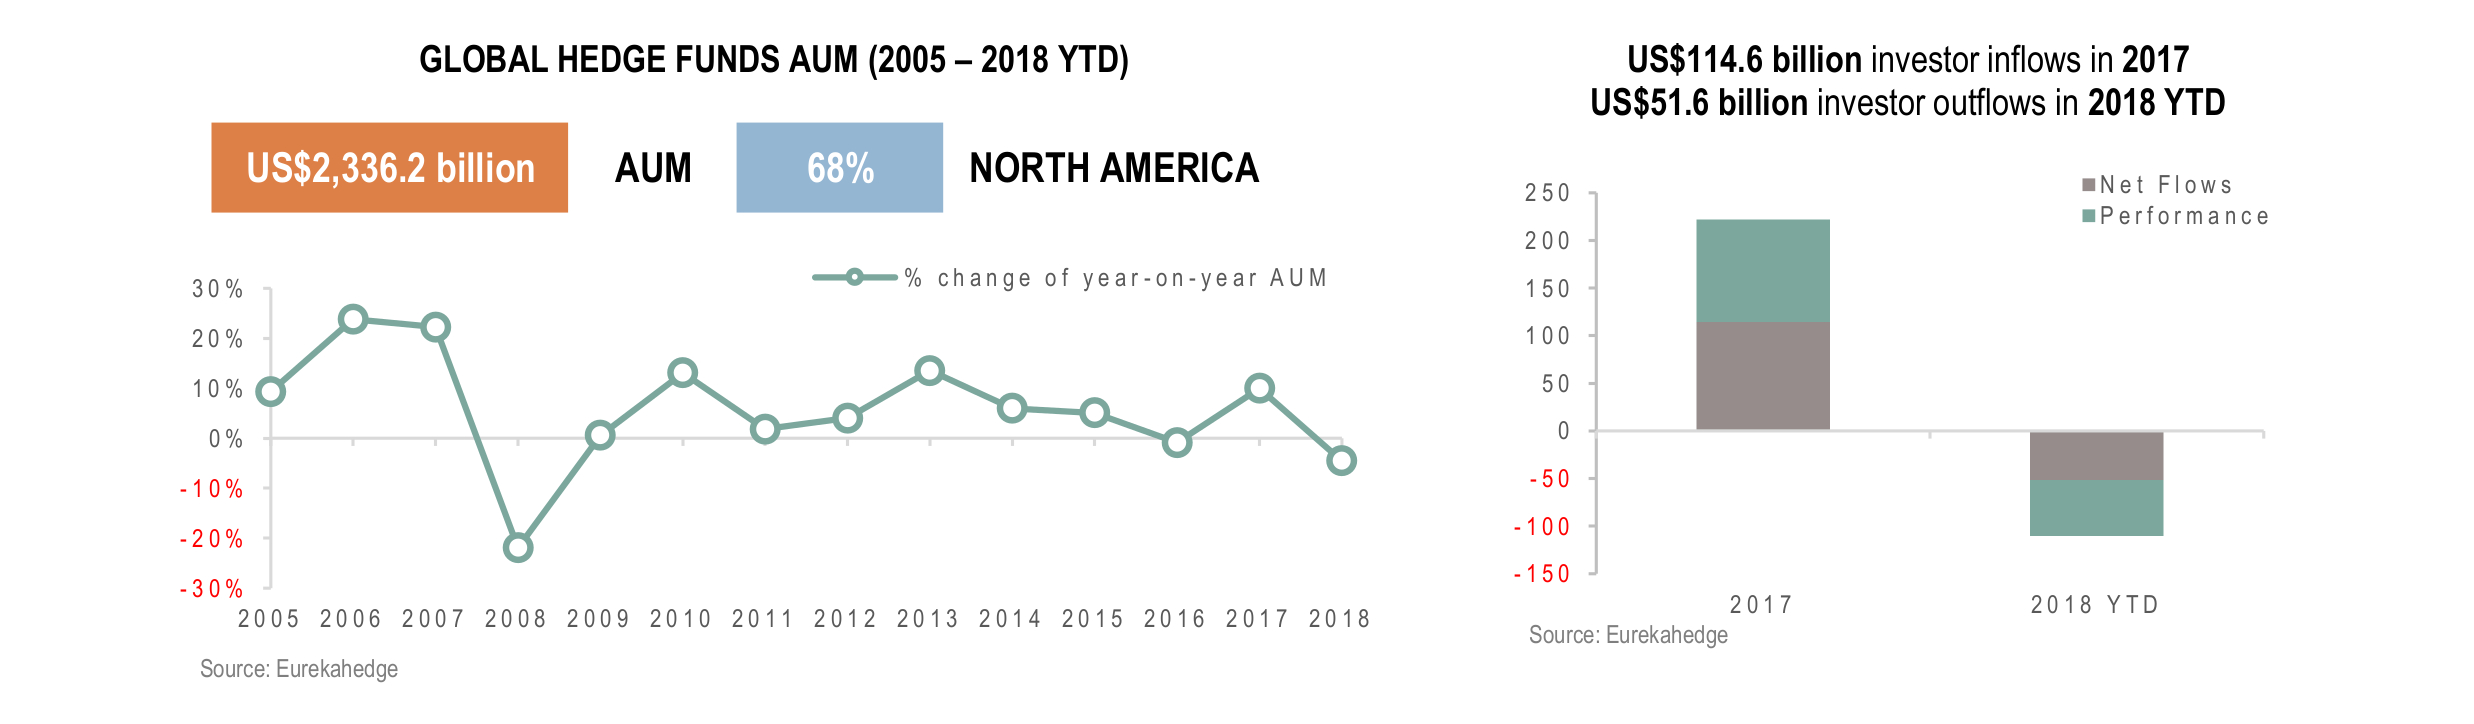 Global Hedge Funds Infographic January 2019 - AUM